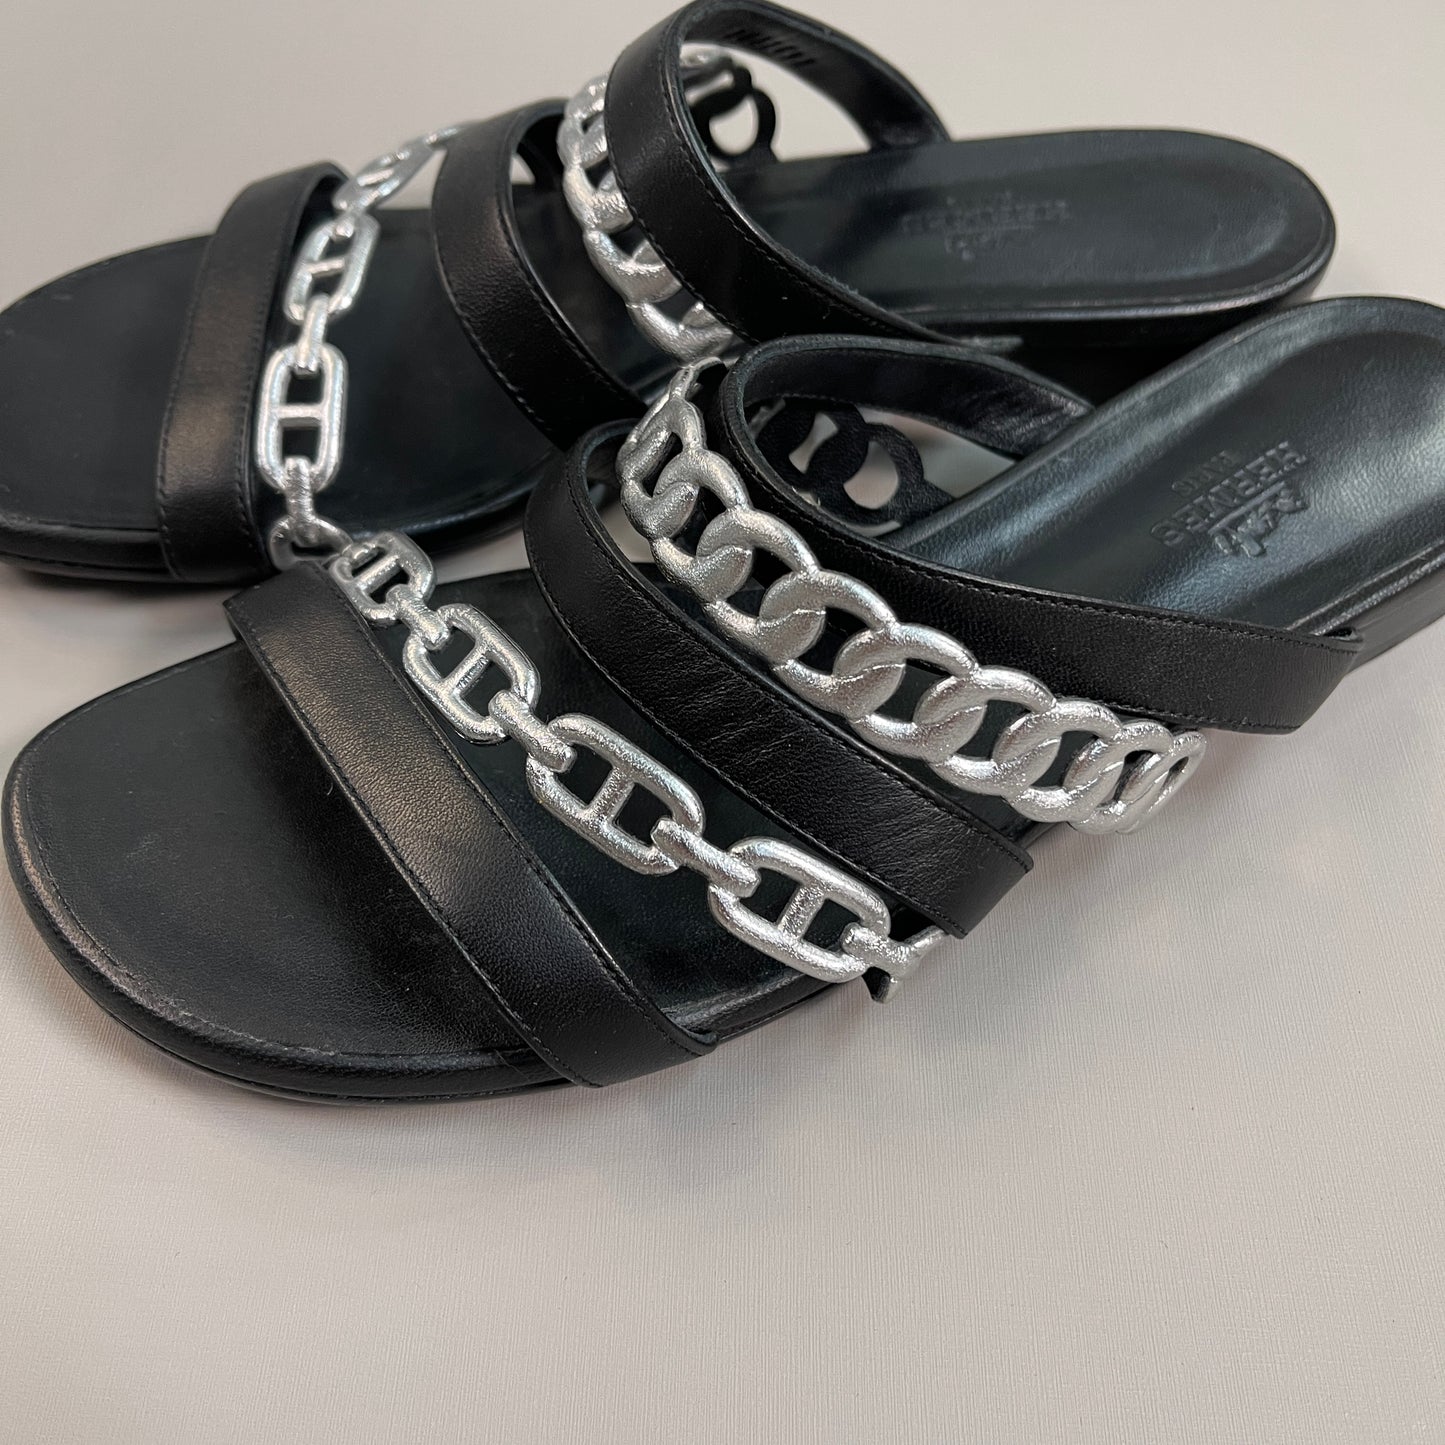 HERMES Leather Chaine d'Ancre Sandals Women's Sz 37 / US ~7 Black / Silver (Pre-Owned)